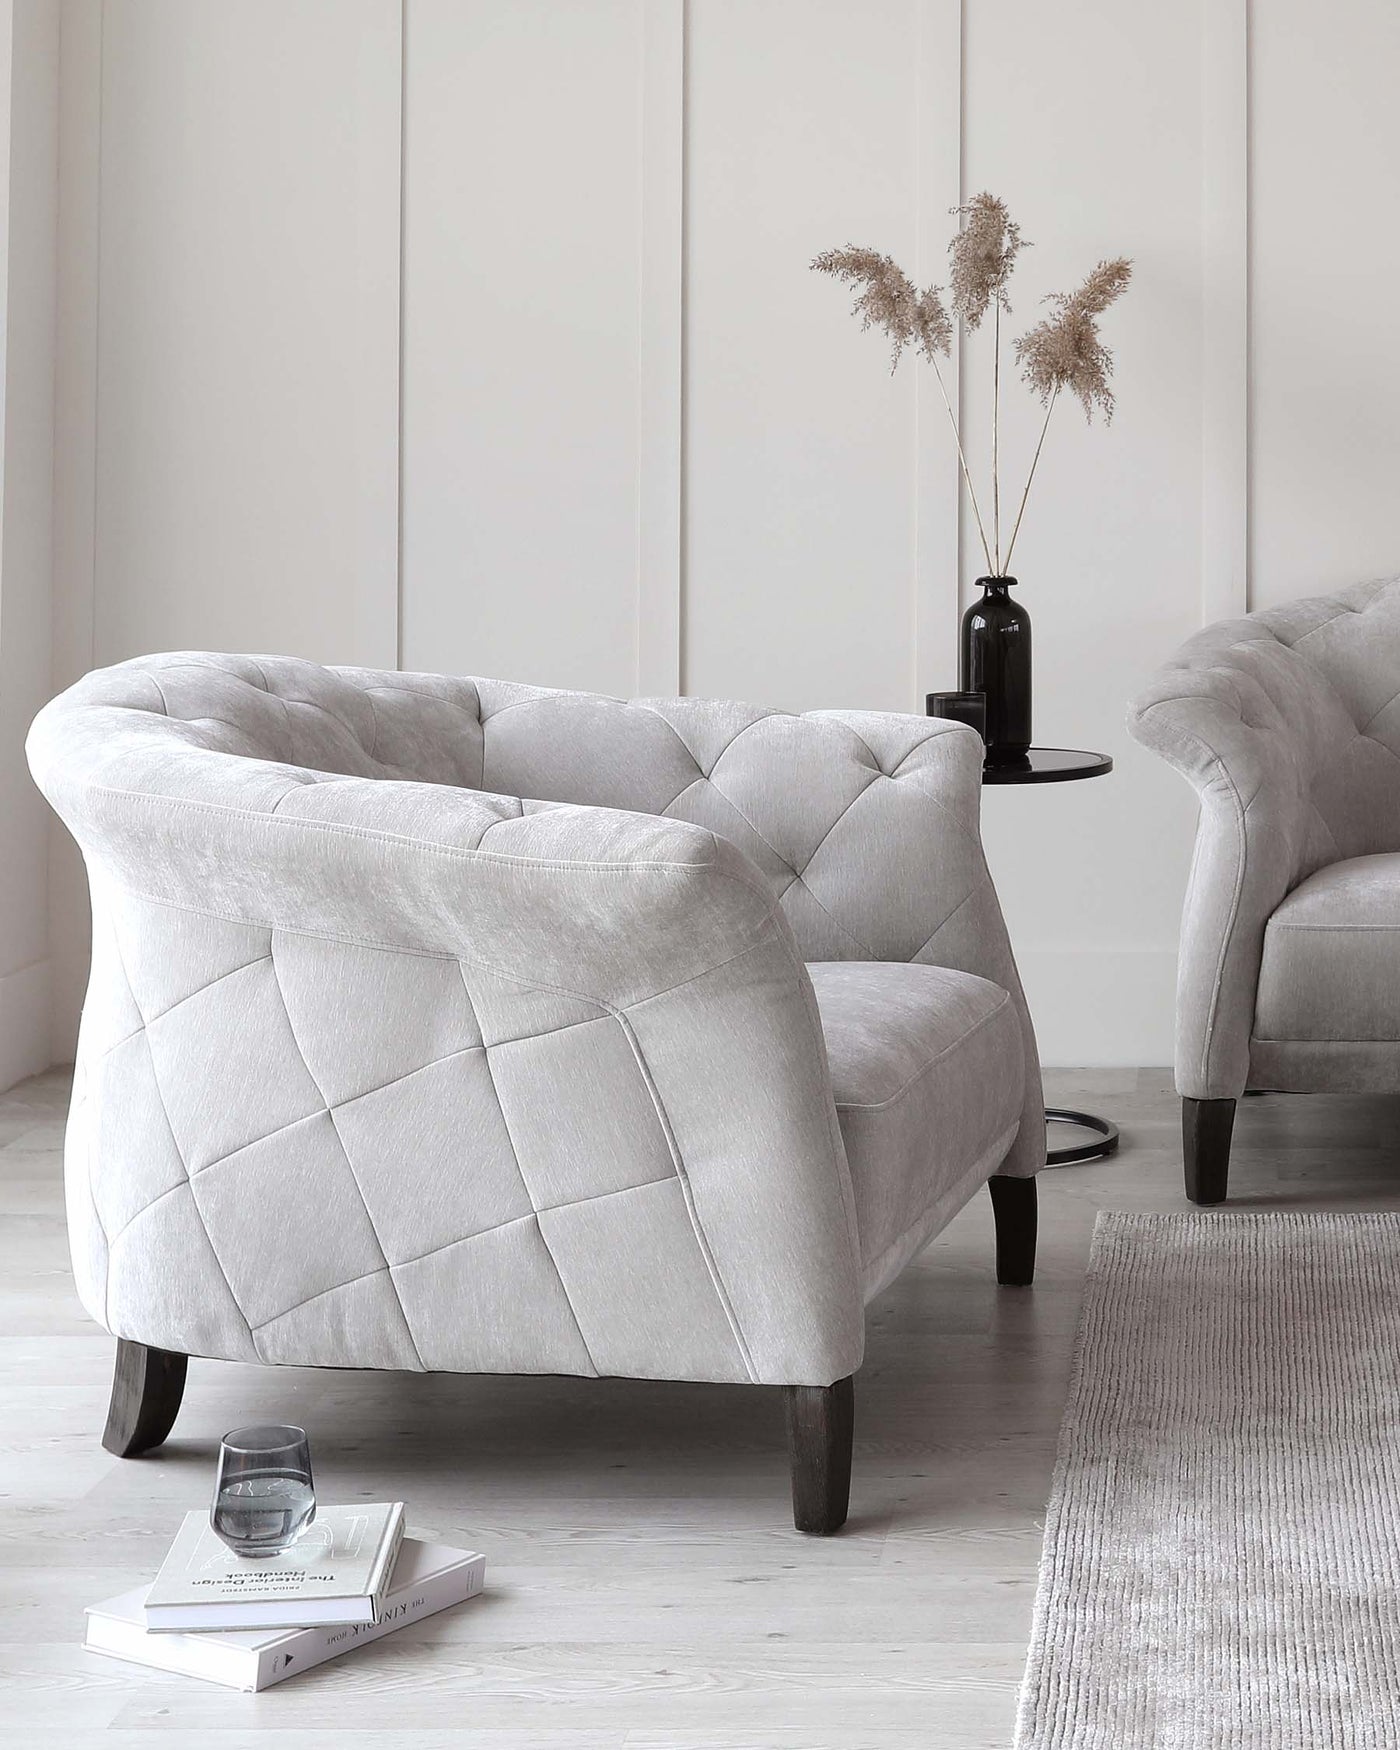 Elegant light grey tufted armchair with a voluptuous design and dark wooden legs, complemented by a neutral-toned area rug, a round side table with a vase of dried pampas grass, and a simplistic book arrangement on the floor.